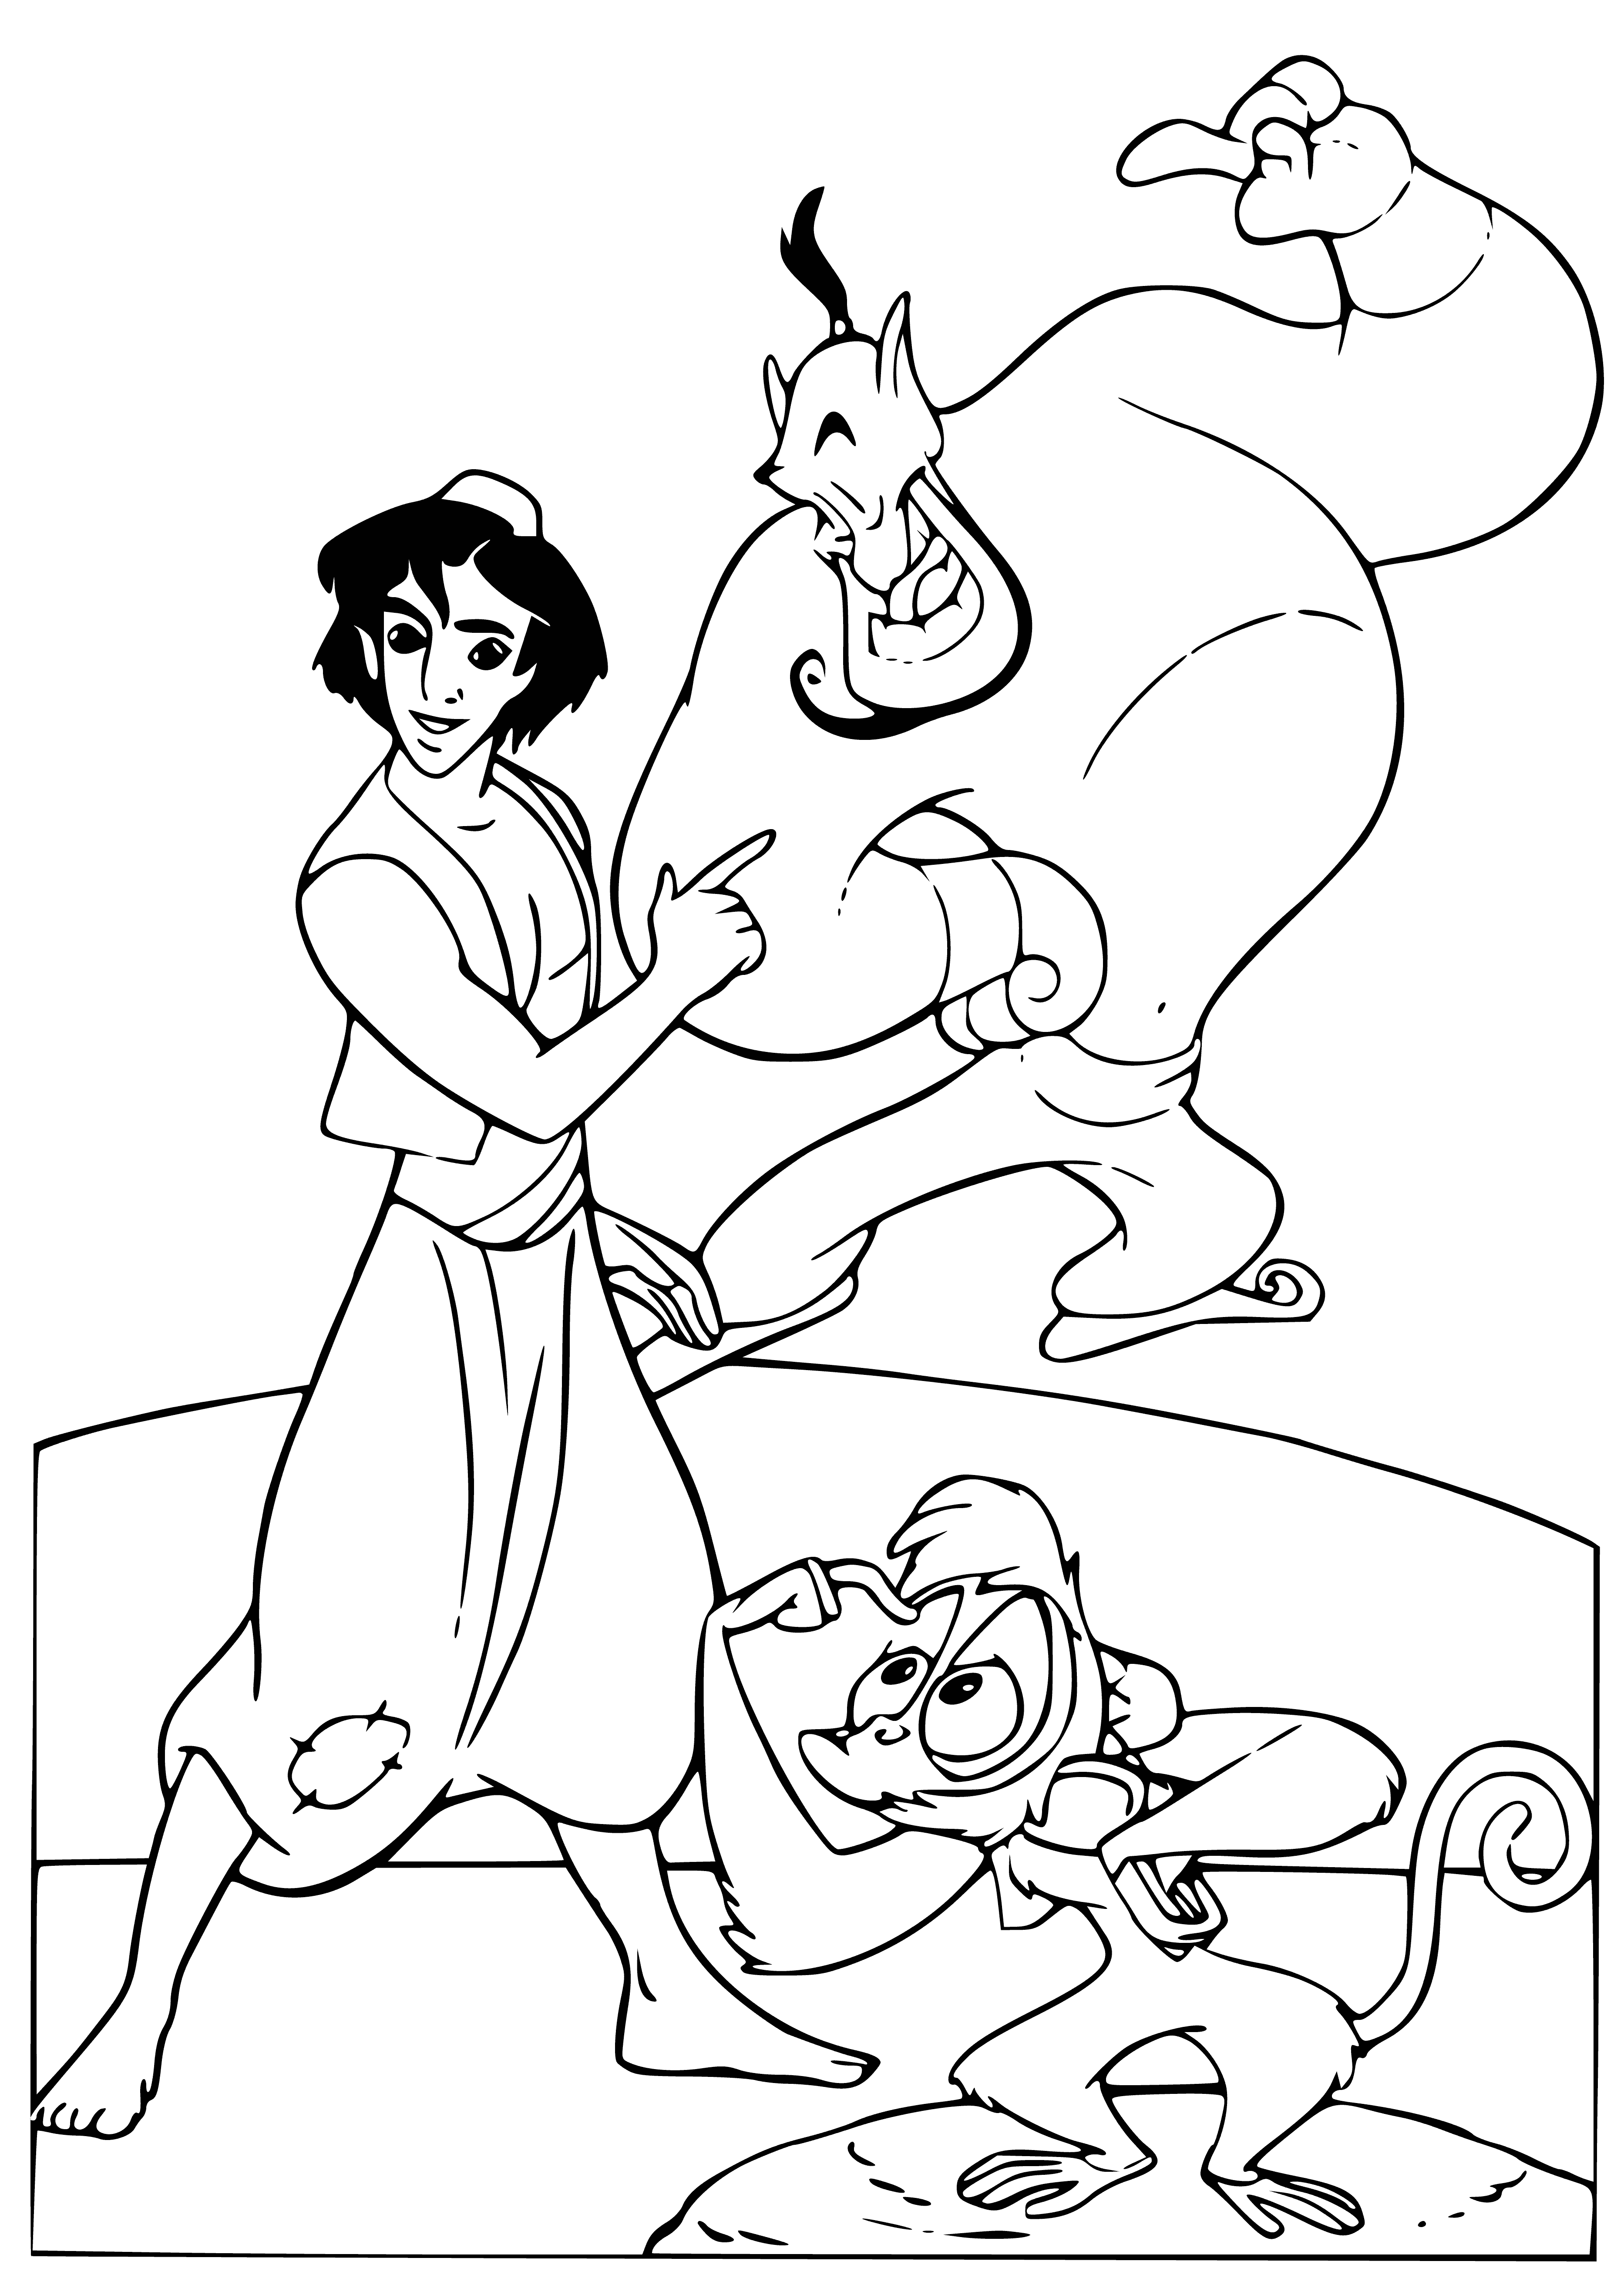 Aladdin, Jeannie and Abu coloring page